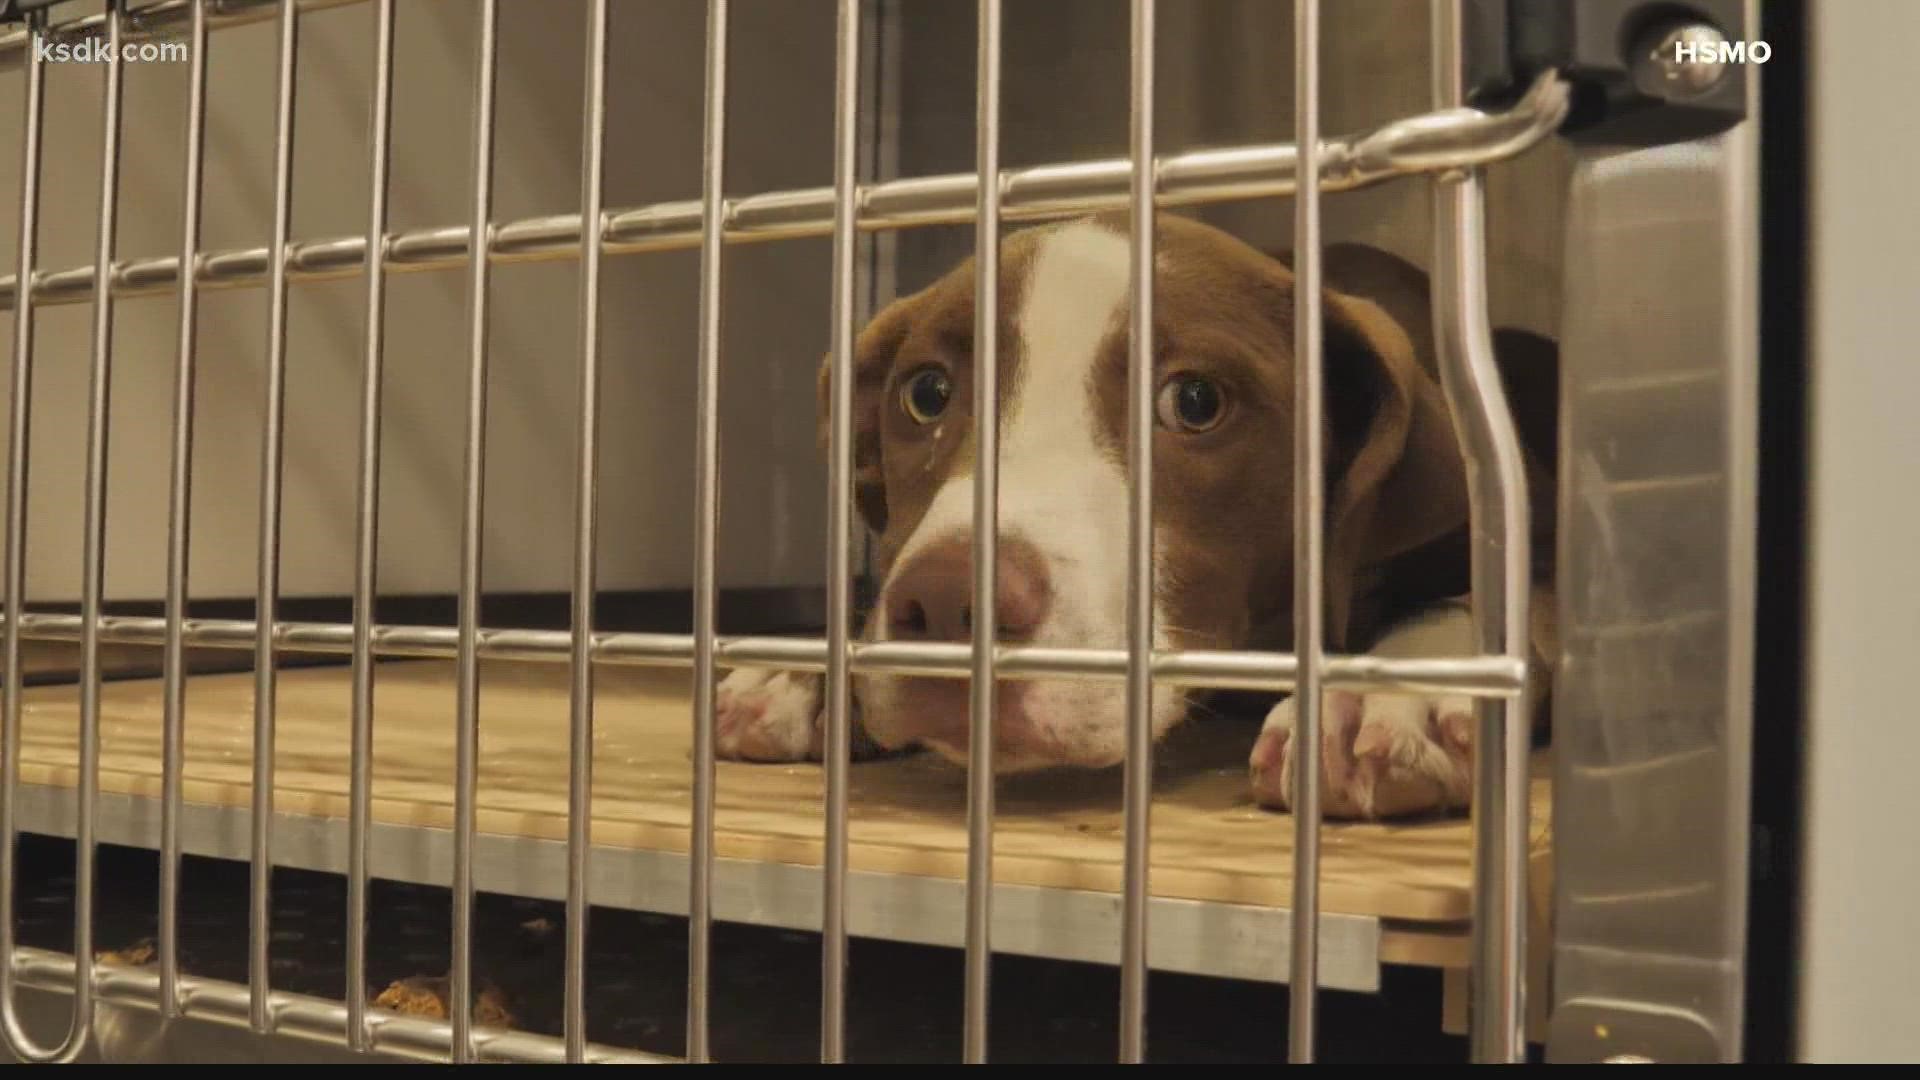 The Humane Society of Missouri said all of the dogs will be available for adoption soon